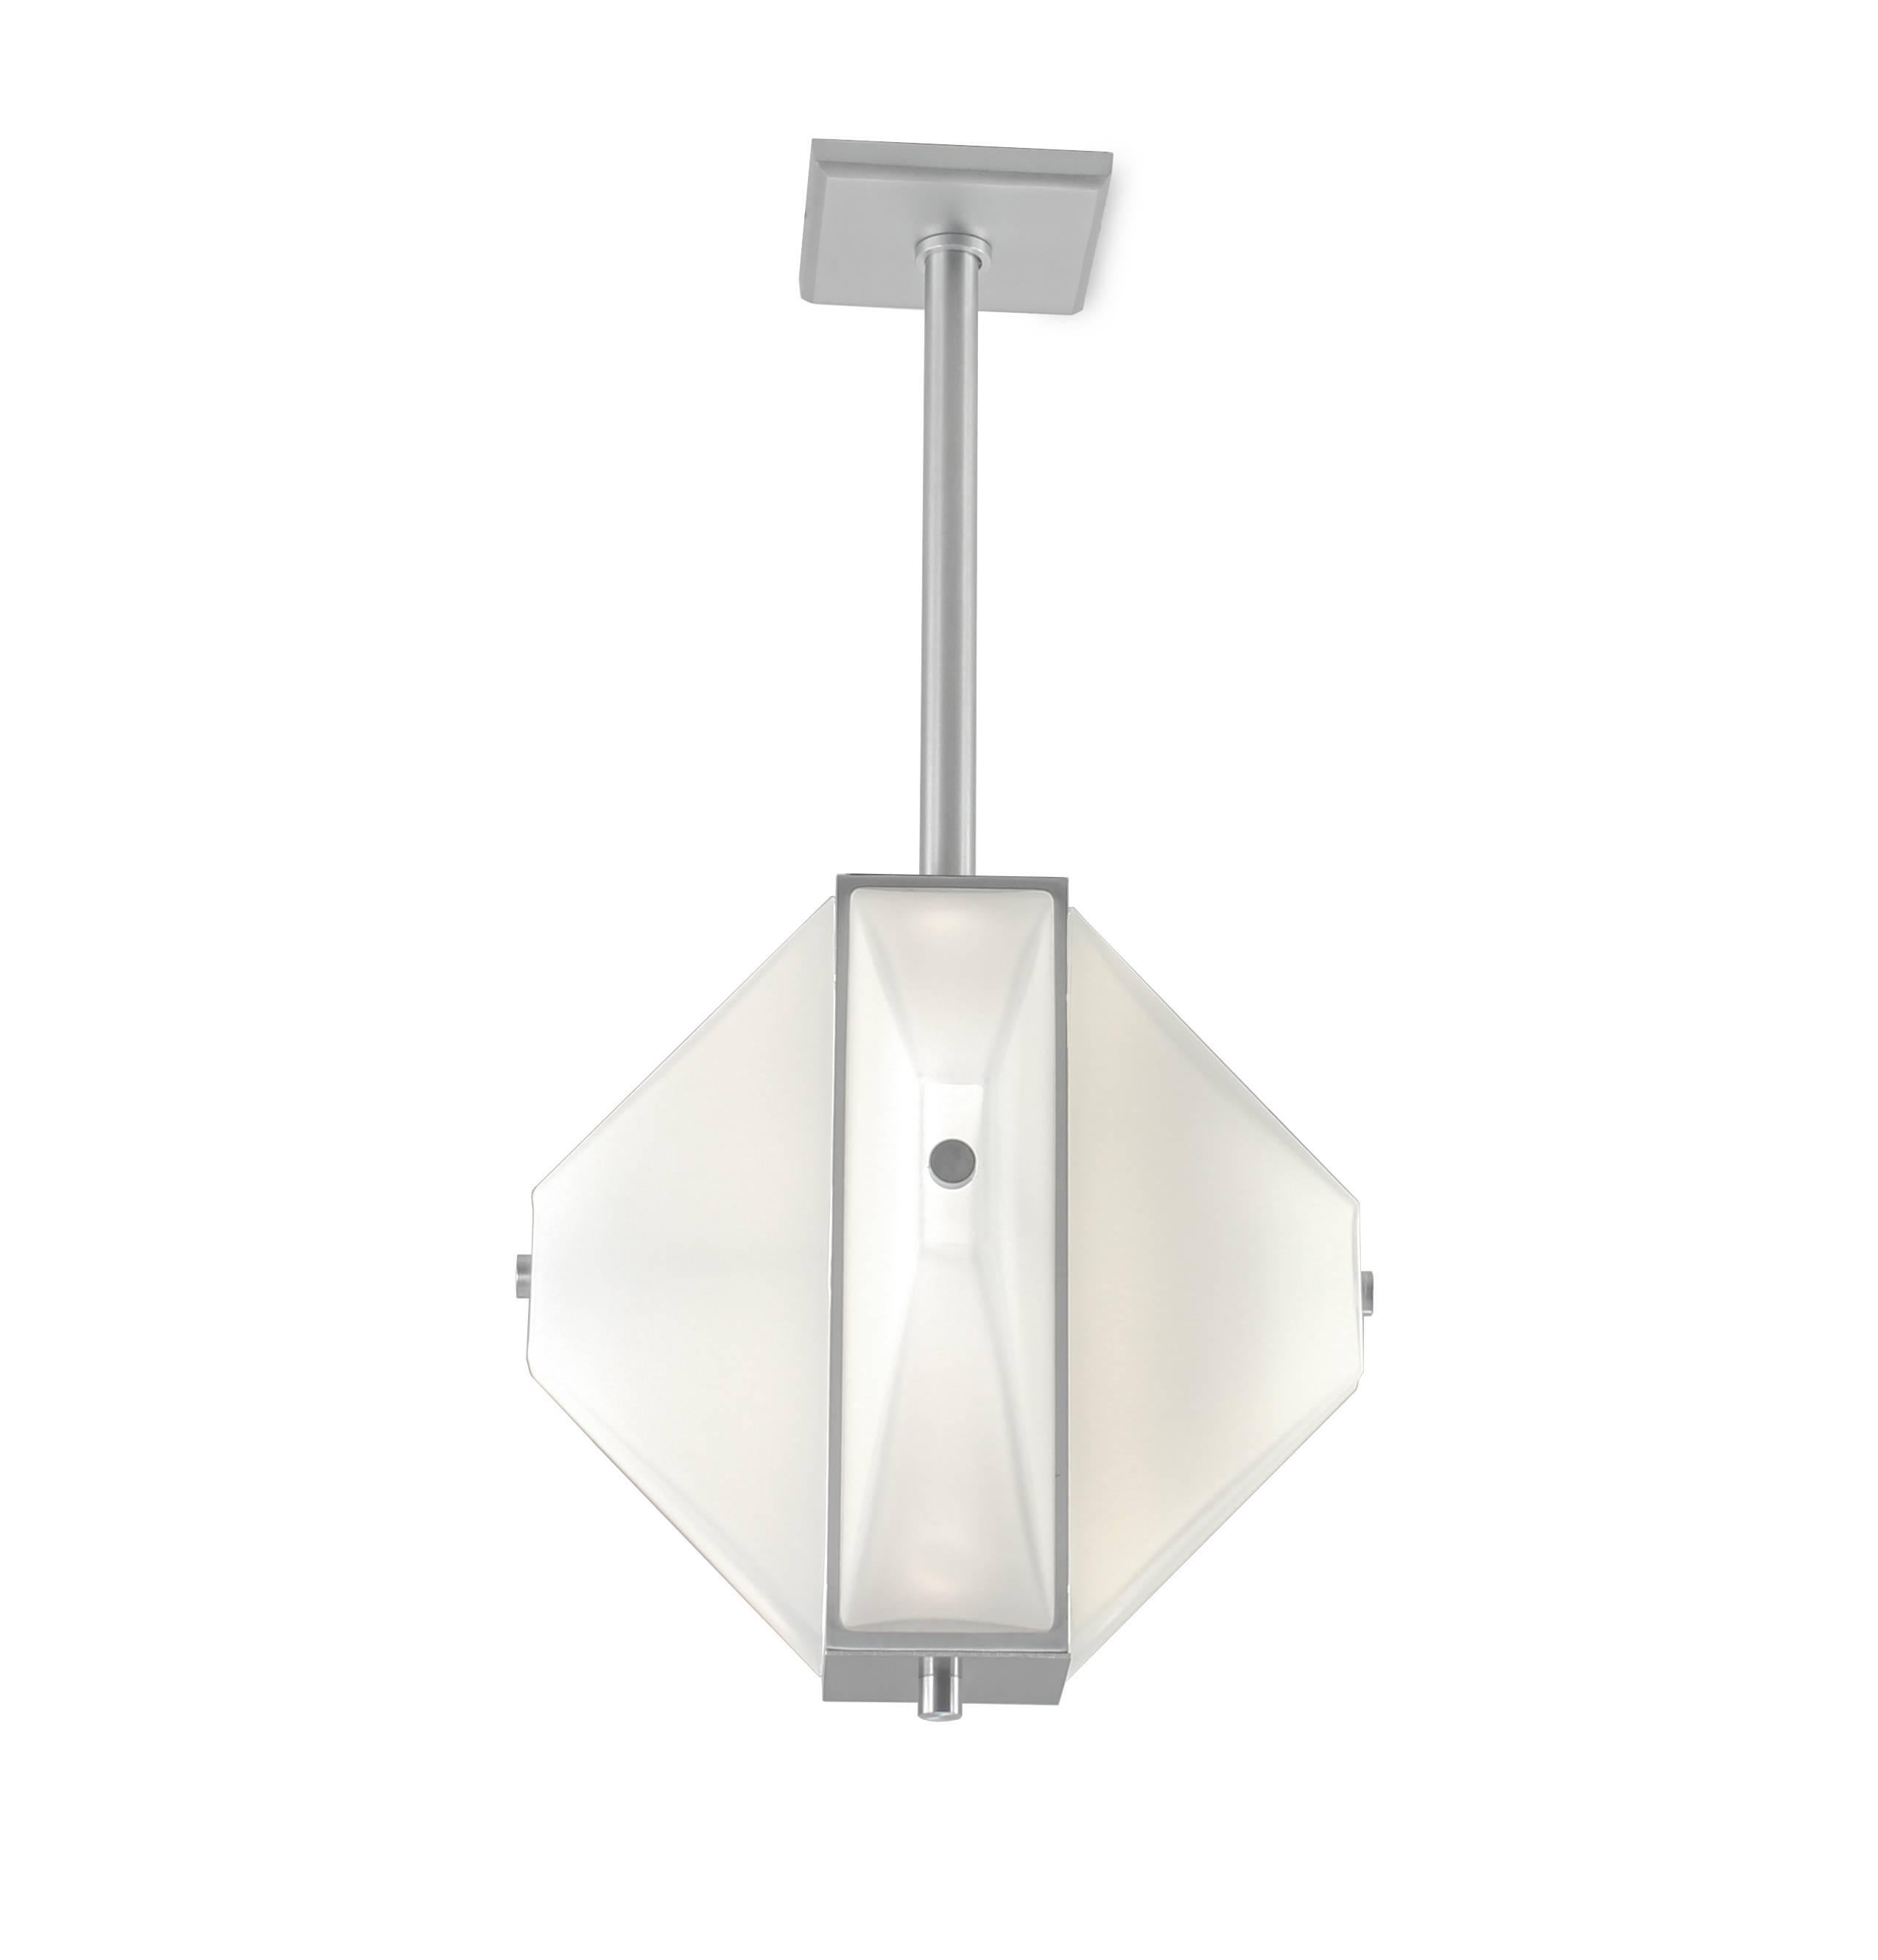 Pendant light in tapered white glass and satin aluminum. Mid-Century Modern inspired. Four tapered pyramid shaped glass diffusers suspended from a machined aluminum hub. Led lamping, standard color temperature 3000k.

Architect, Sandy Littman of